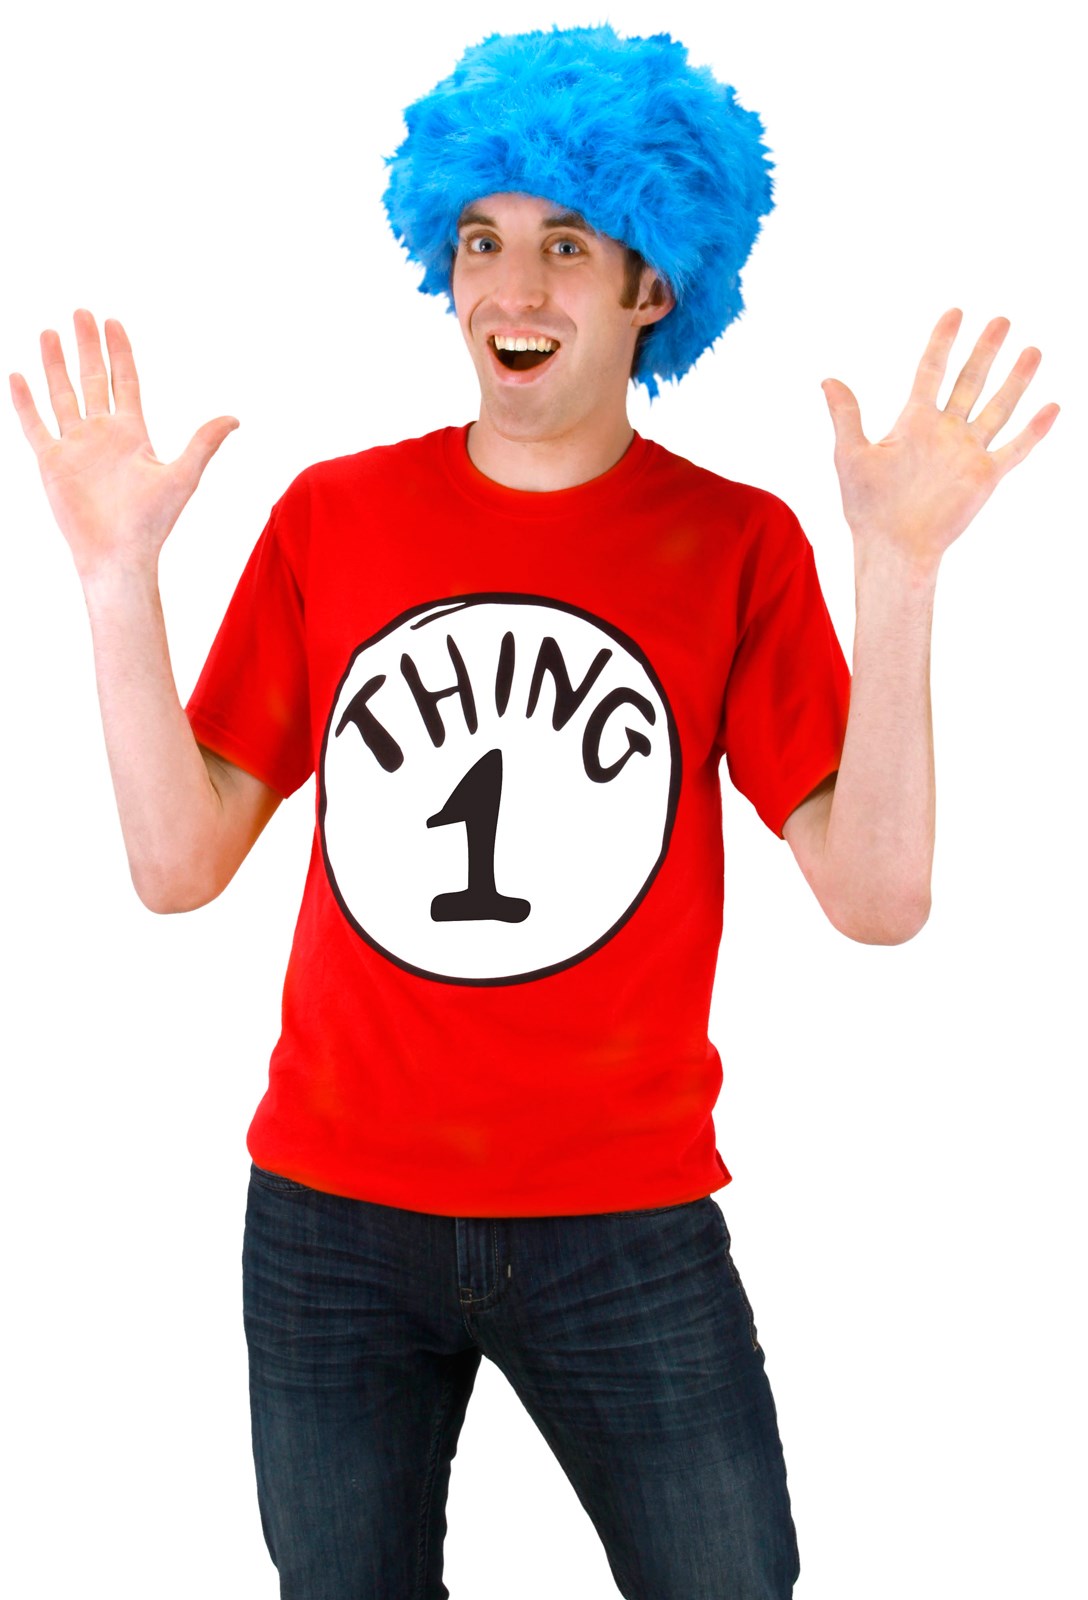 Dr. Seuss Cat In The Hat -Thing 1 Tee Shirt Kit